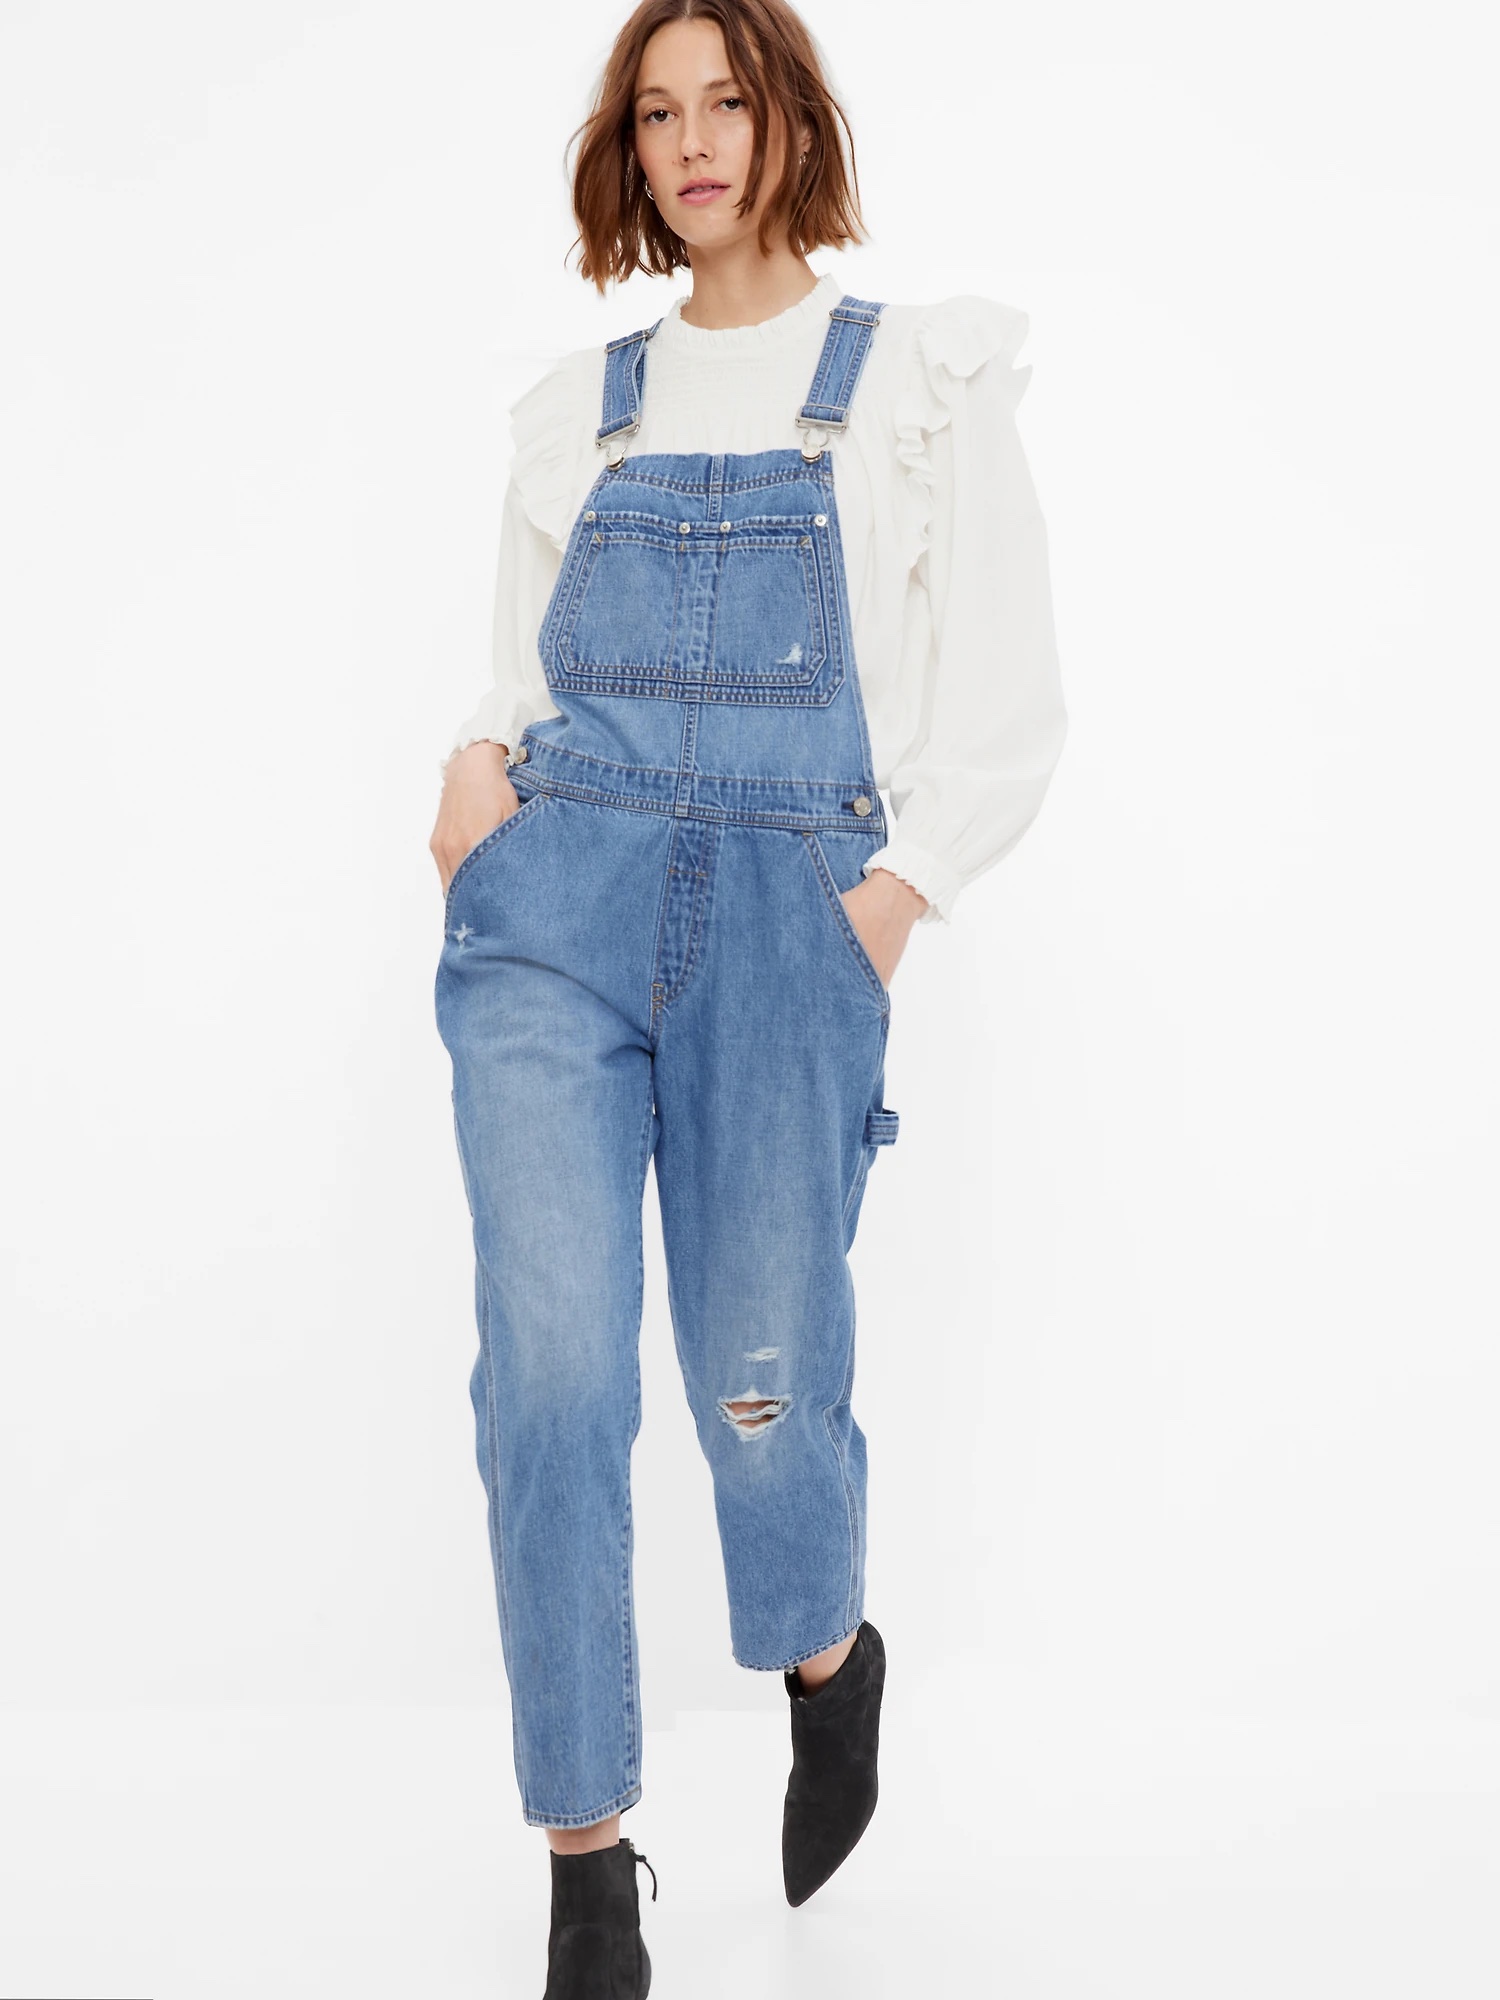 10 Best Overalls for Women, Stylist-Selected 2022 - 247 News Around The ...